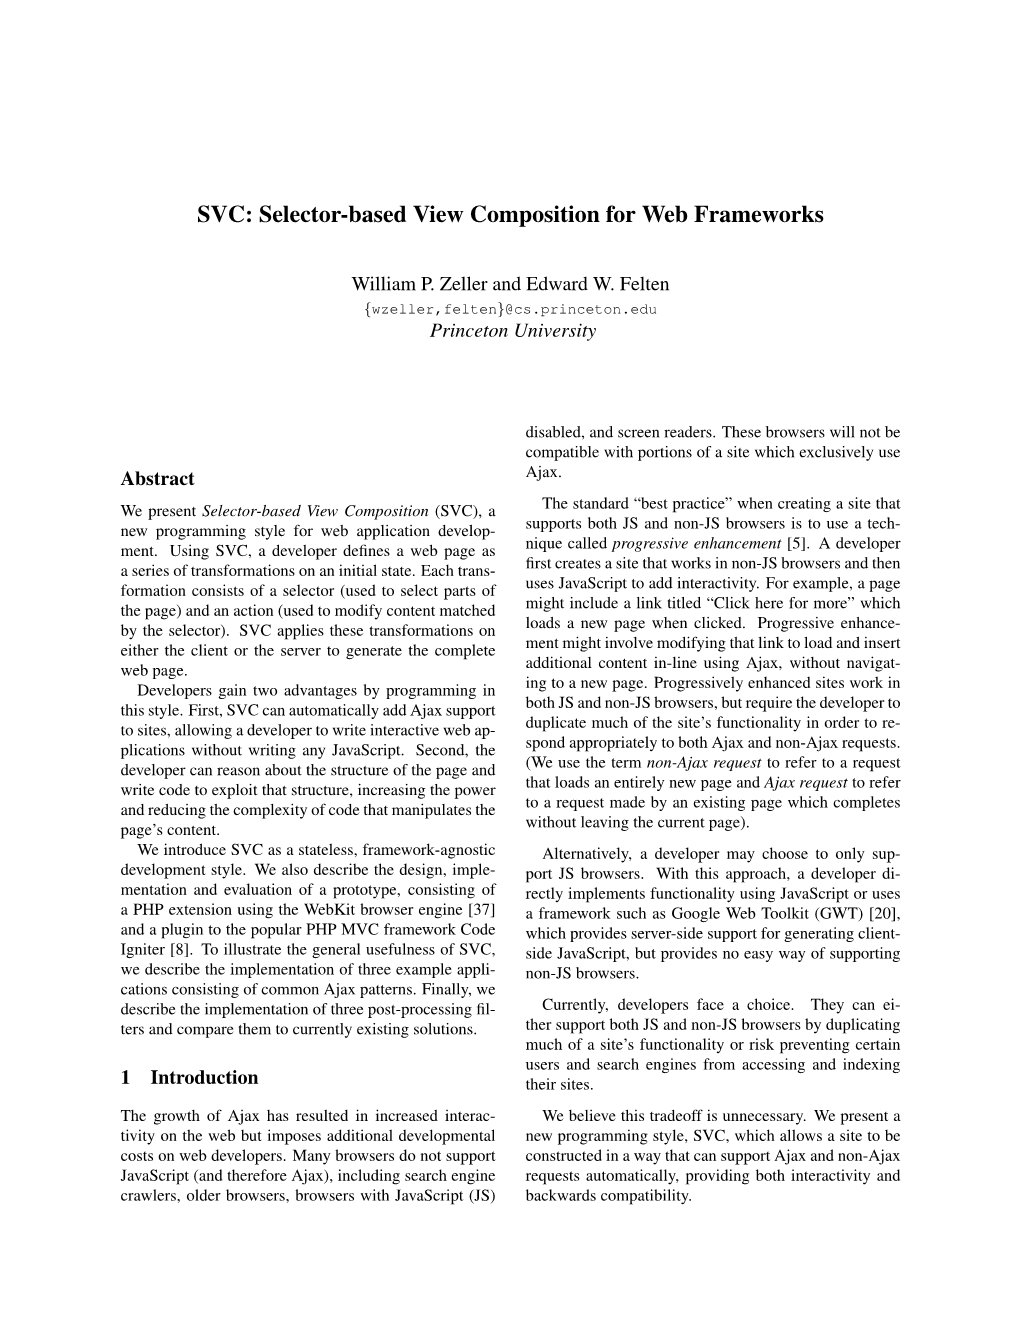 SVC: Selector-Based View Composition for Web Frameworks